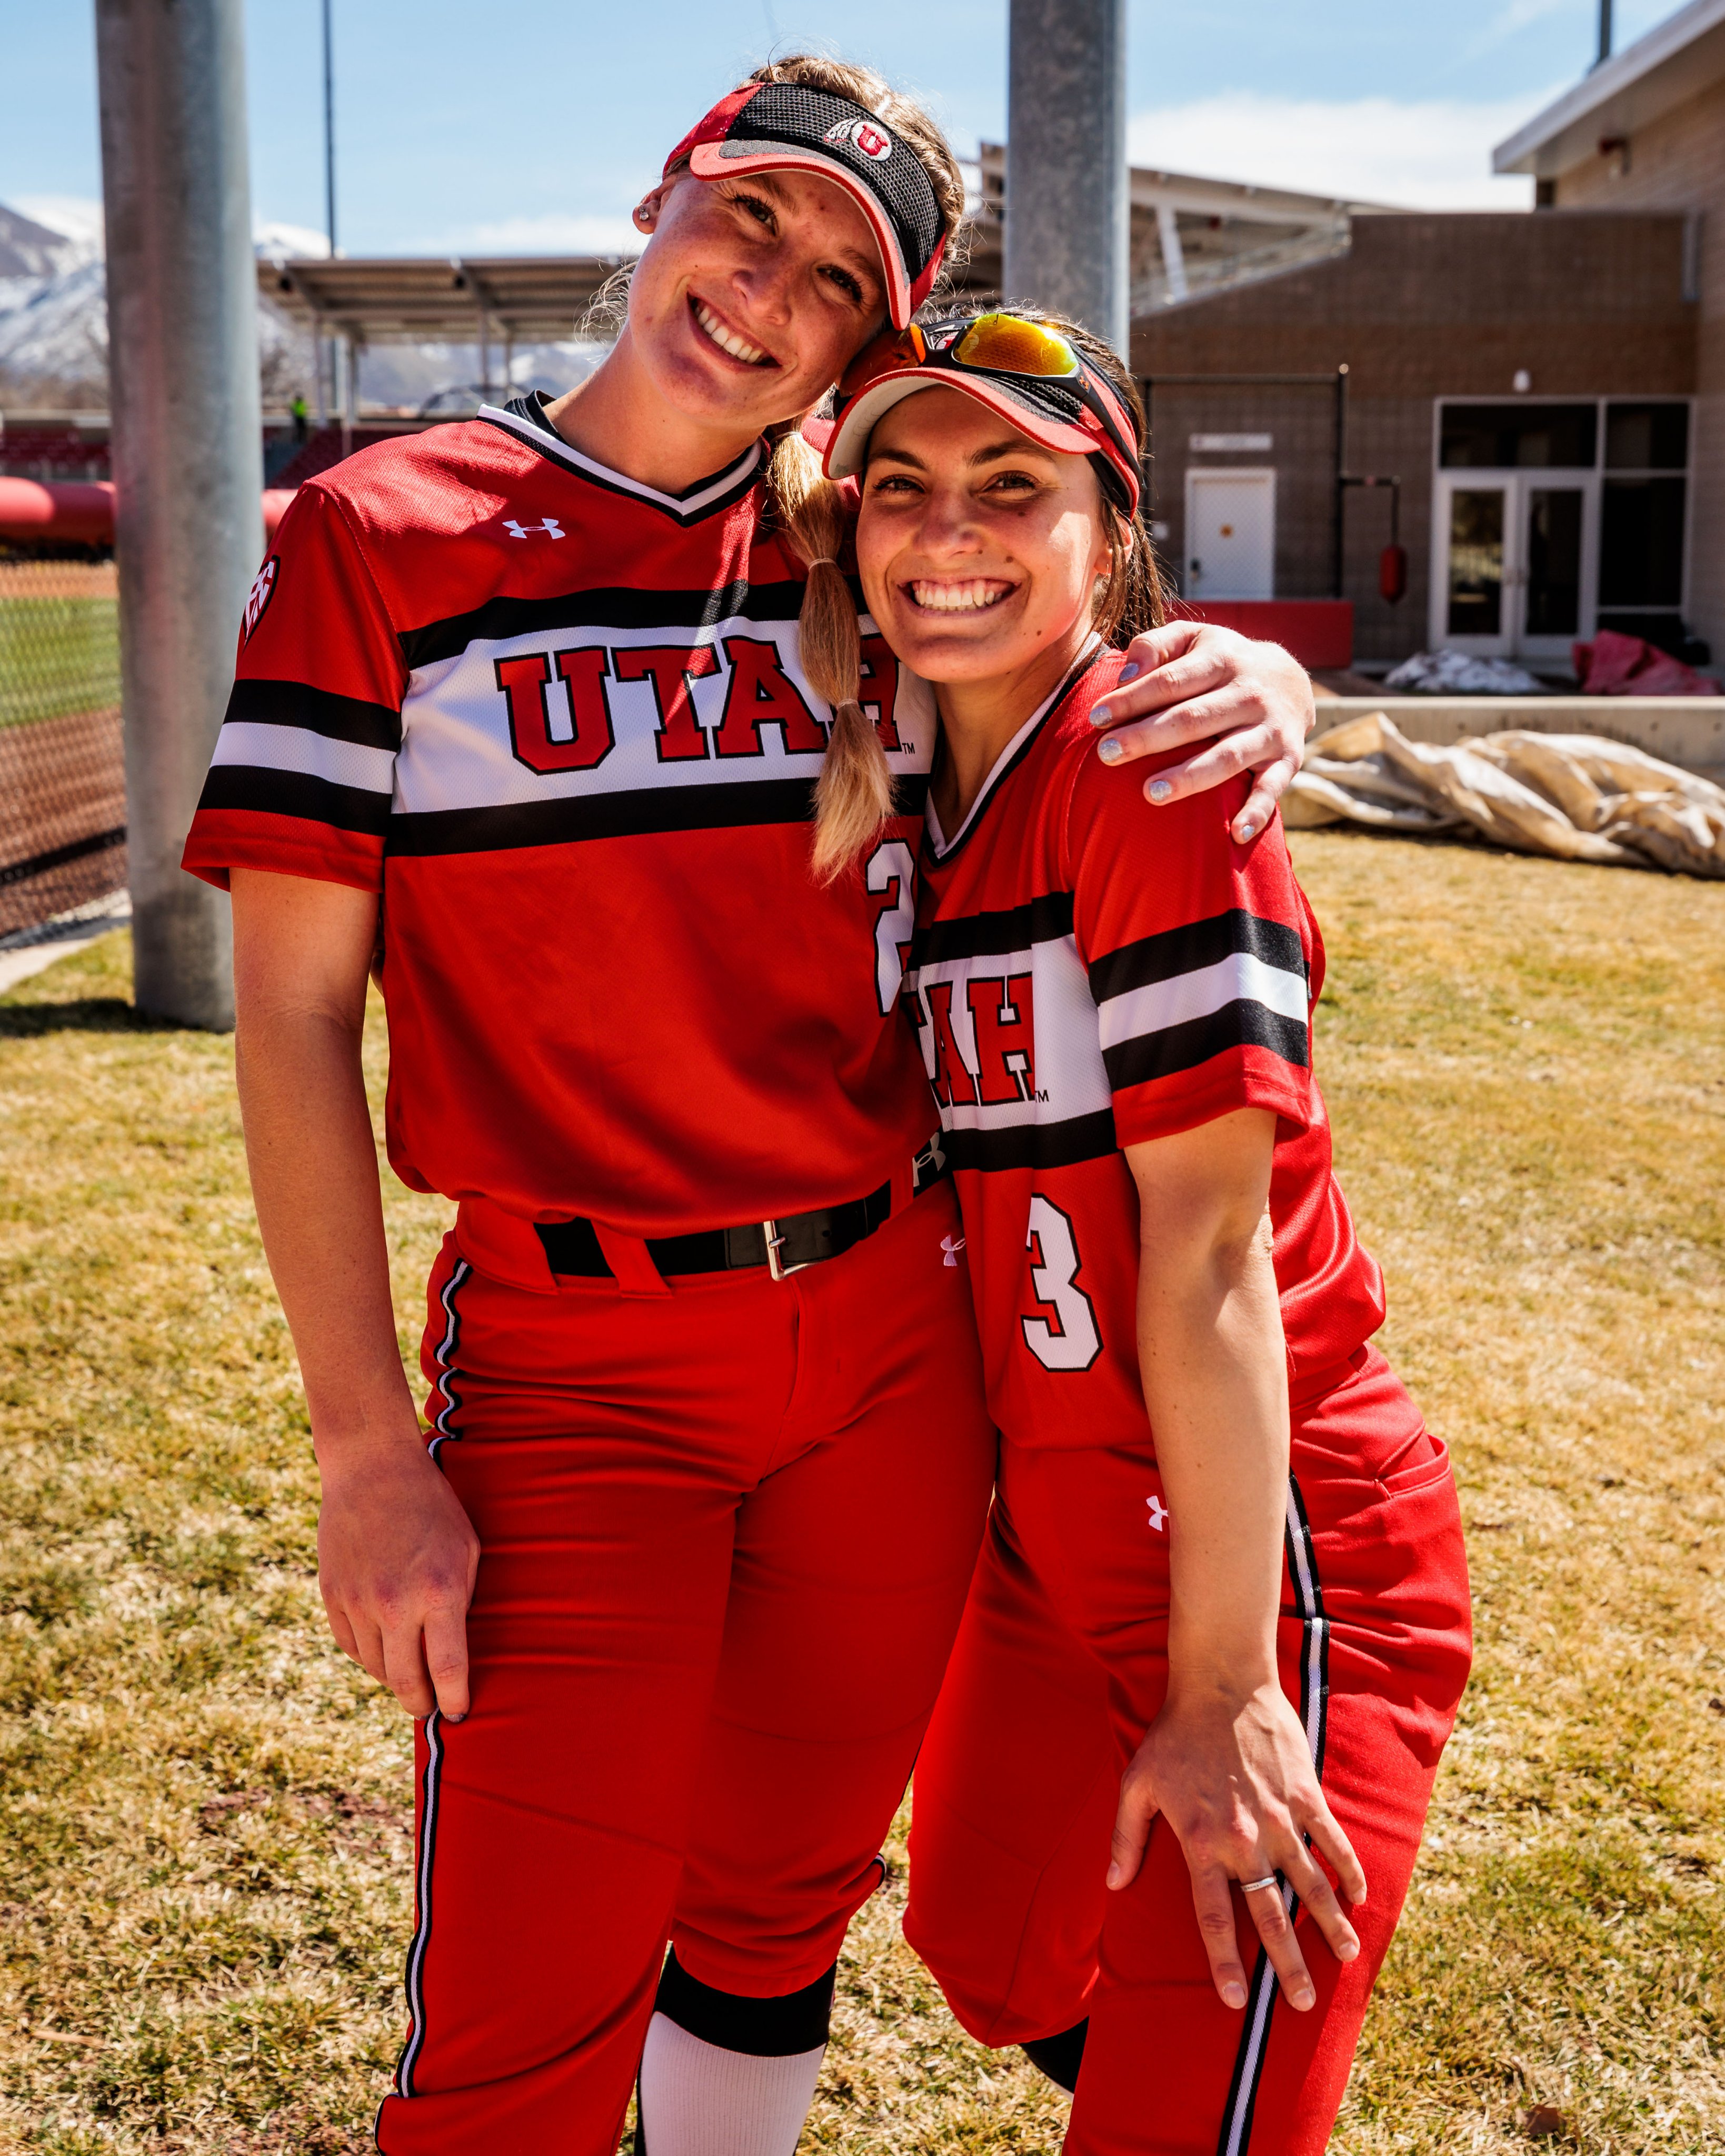 Utah Softball on X: Today we will be wearing special uniforms as